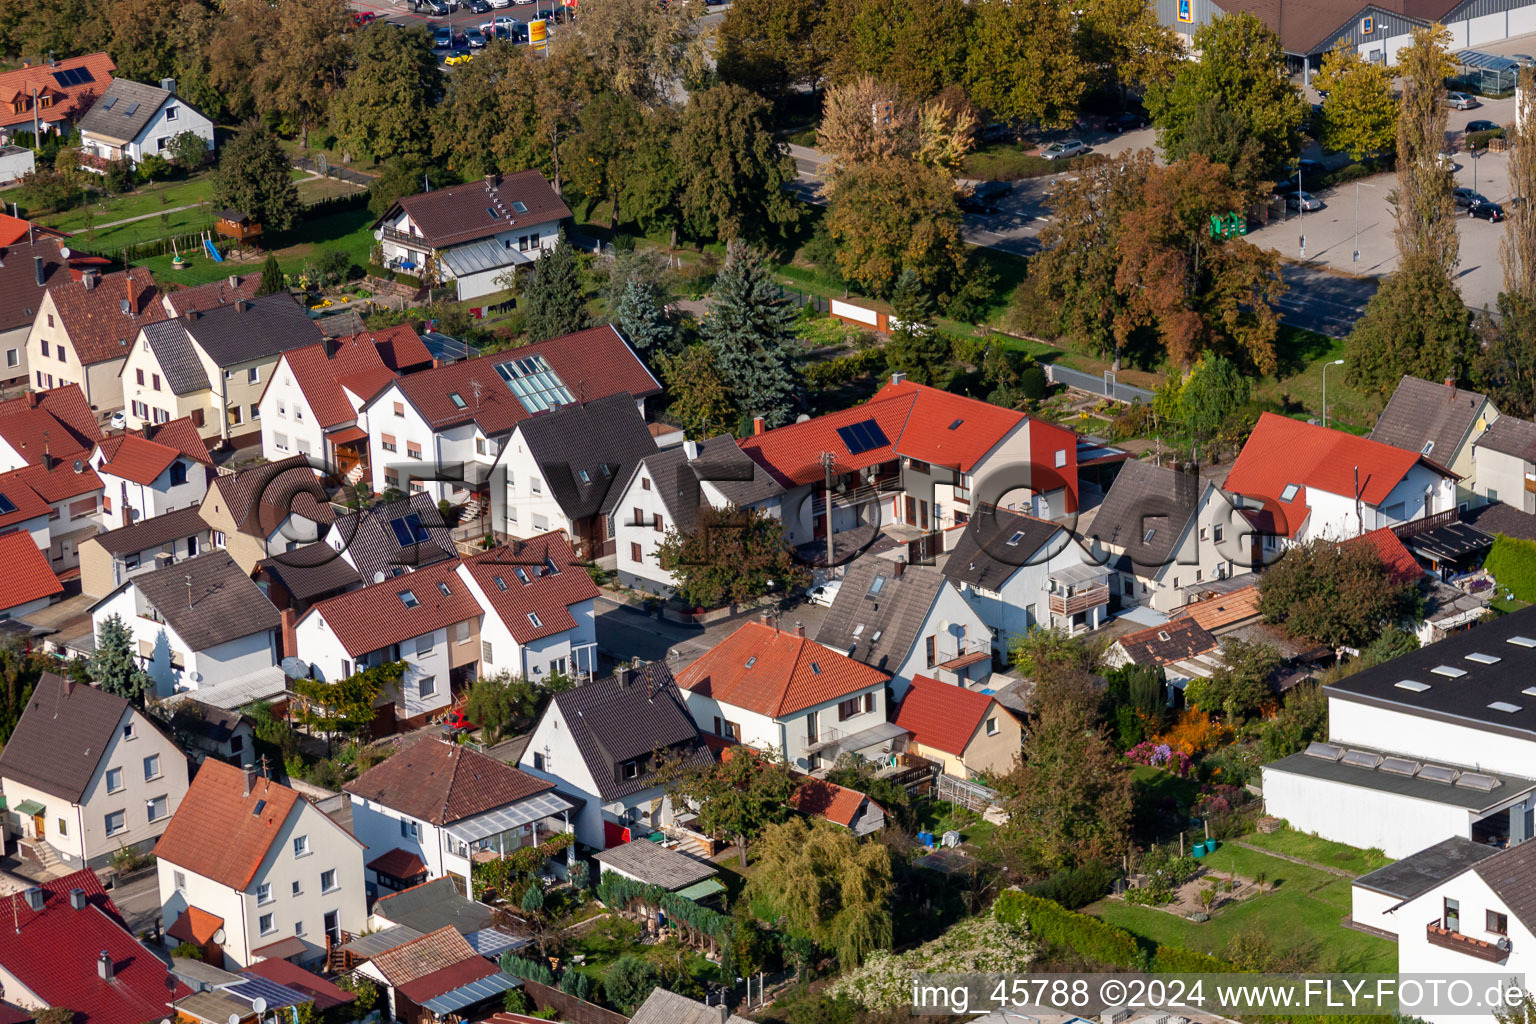 Garden City settlement in Kandel in the state Rhineland-Palatinate, Germany from above